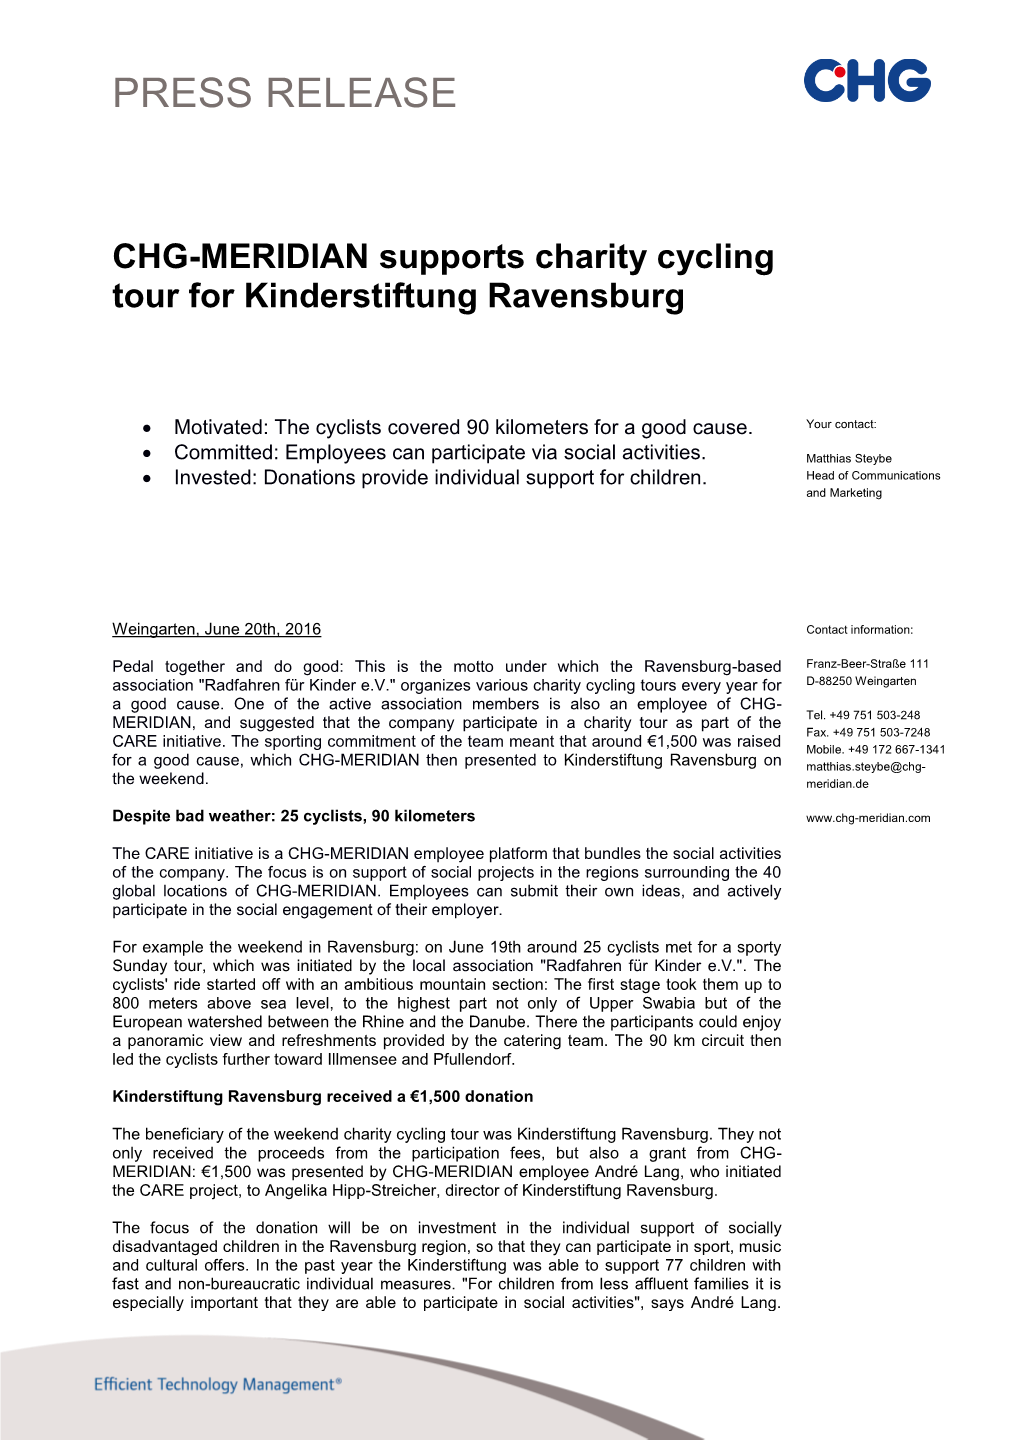 CHG-MERIDIAN Supports Charity Cycling Tour for Kinderstiftung Ravensburg